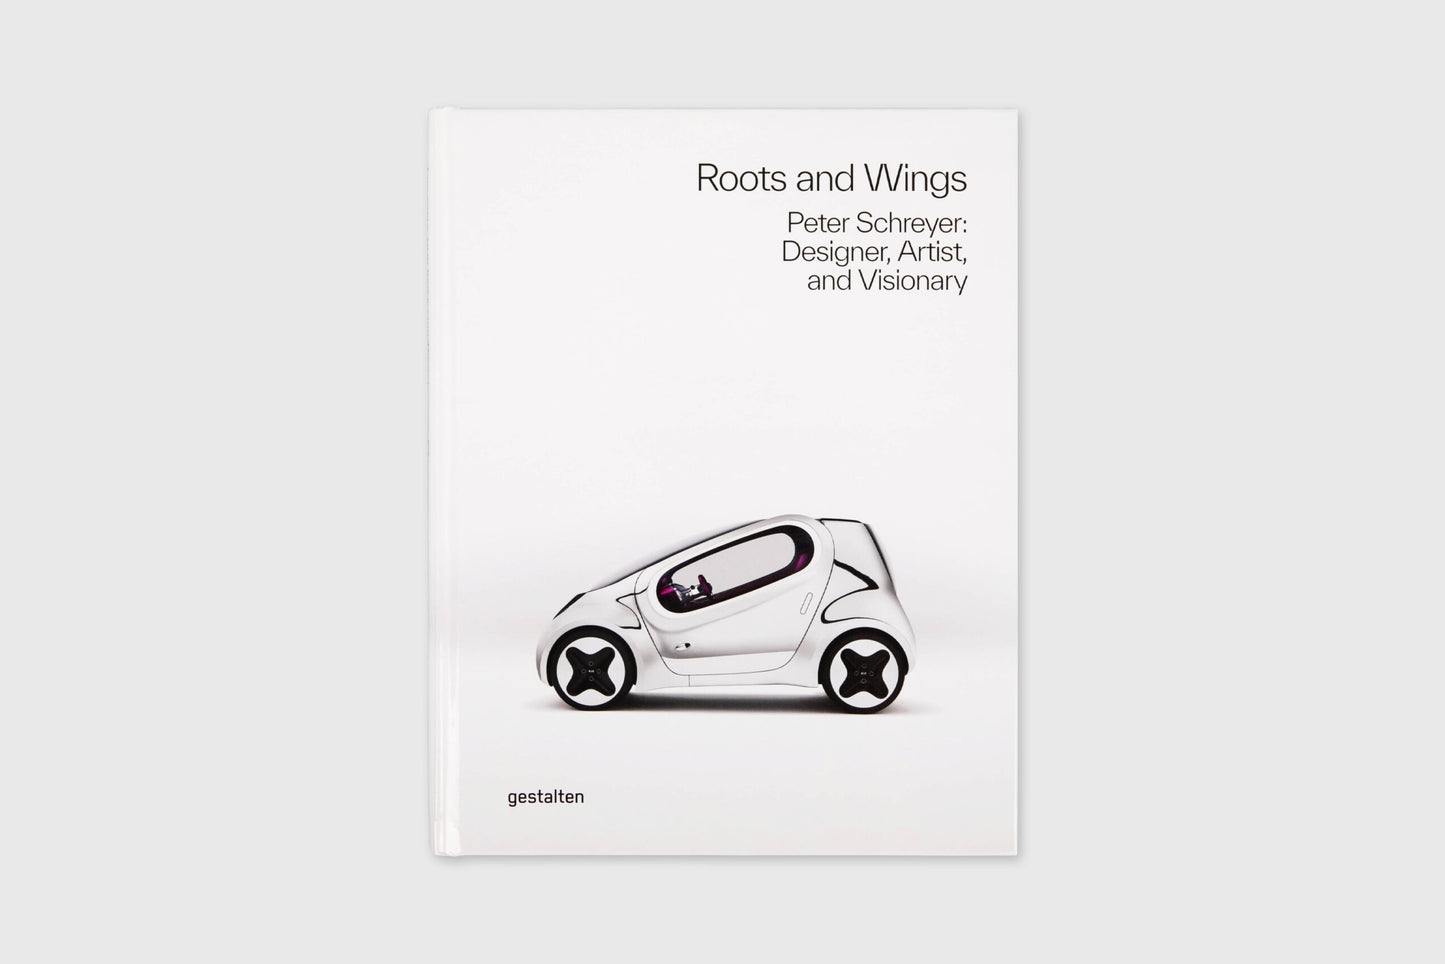 Peter Schreyer: Roots and Wings